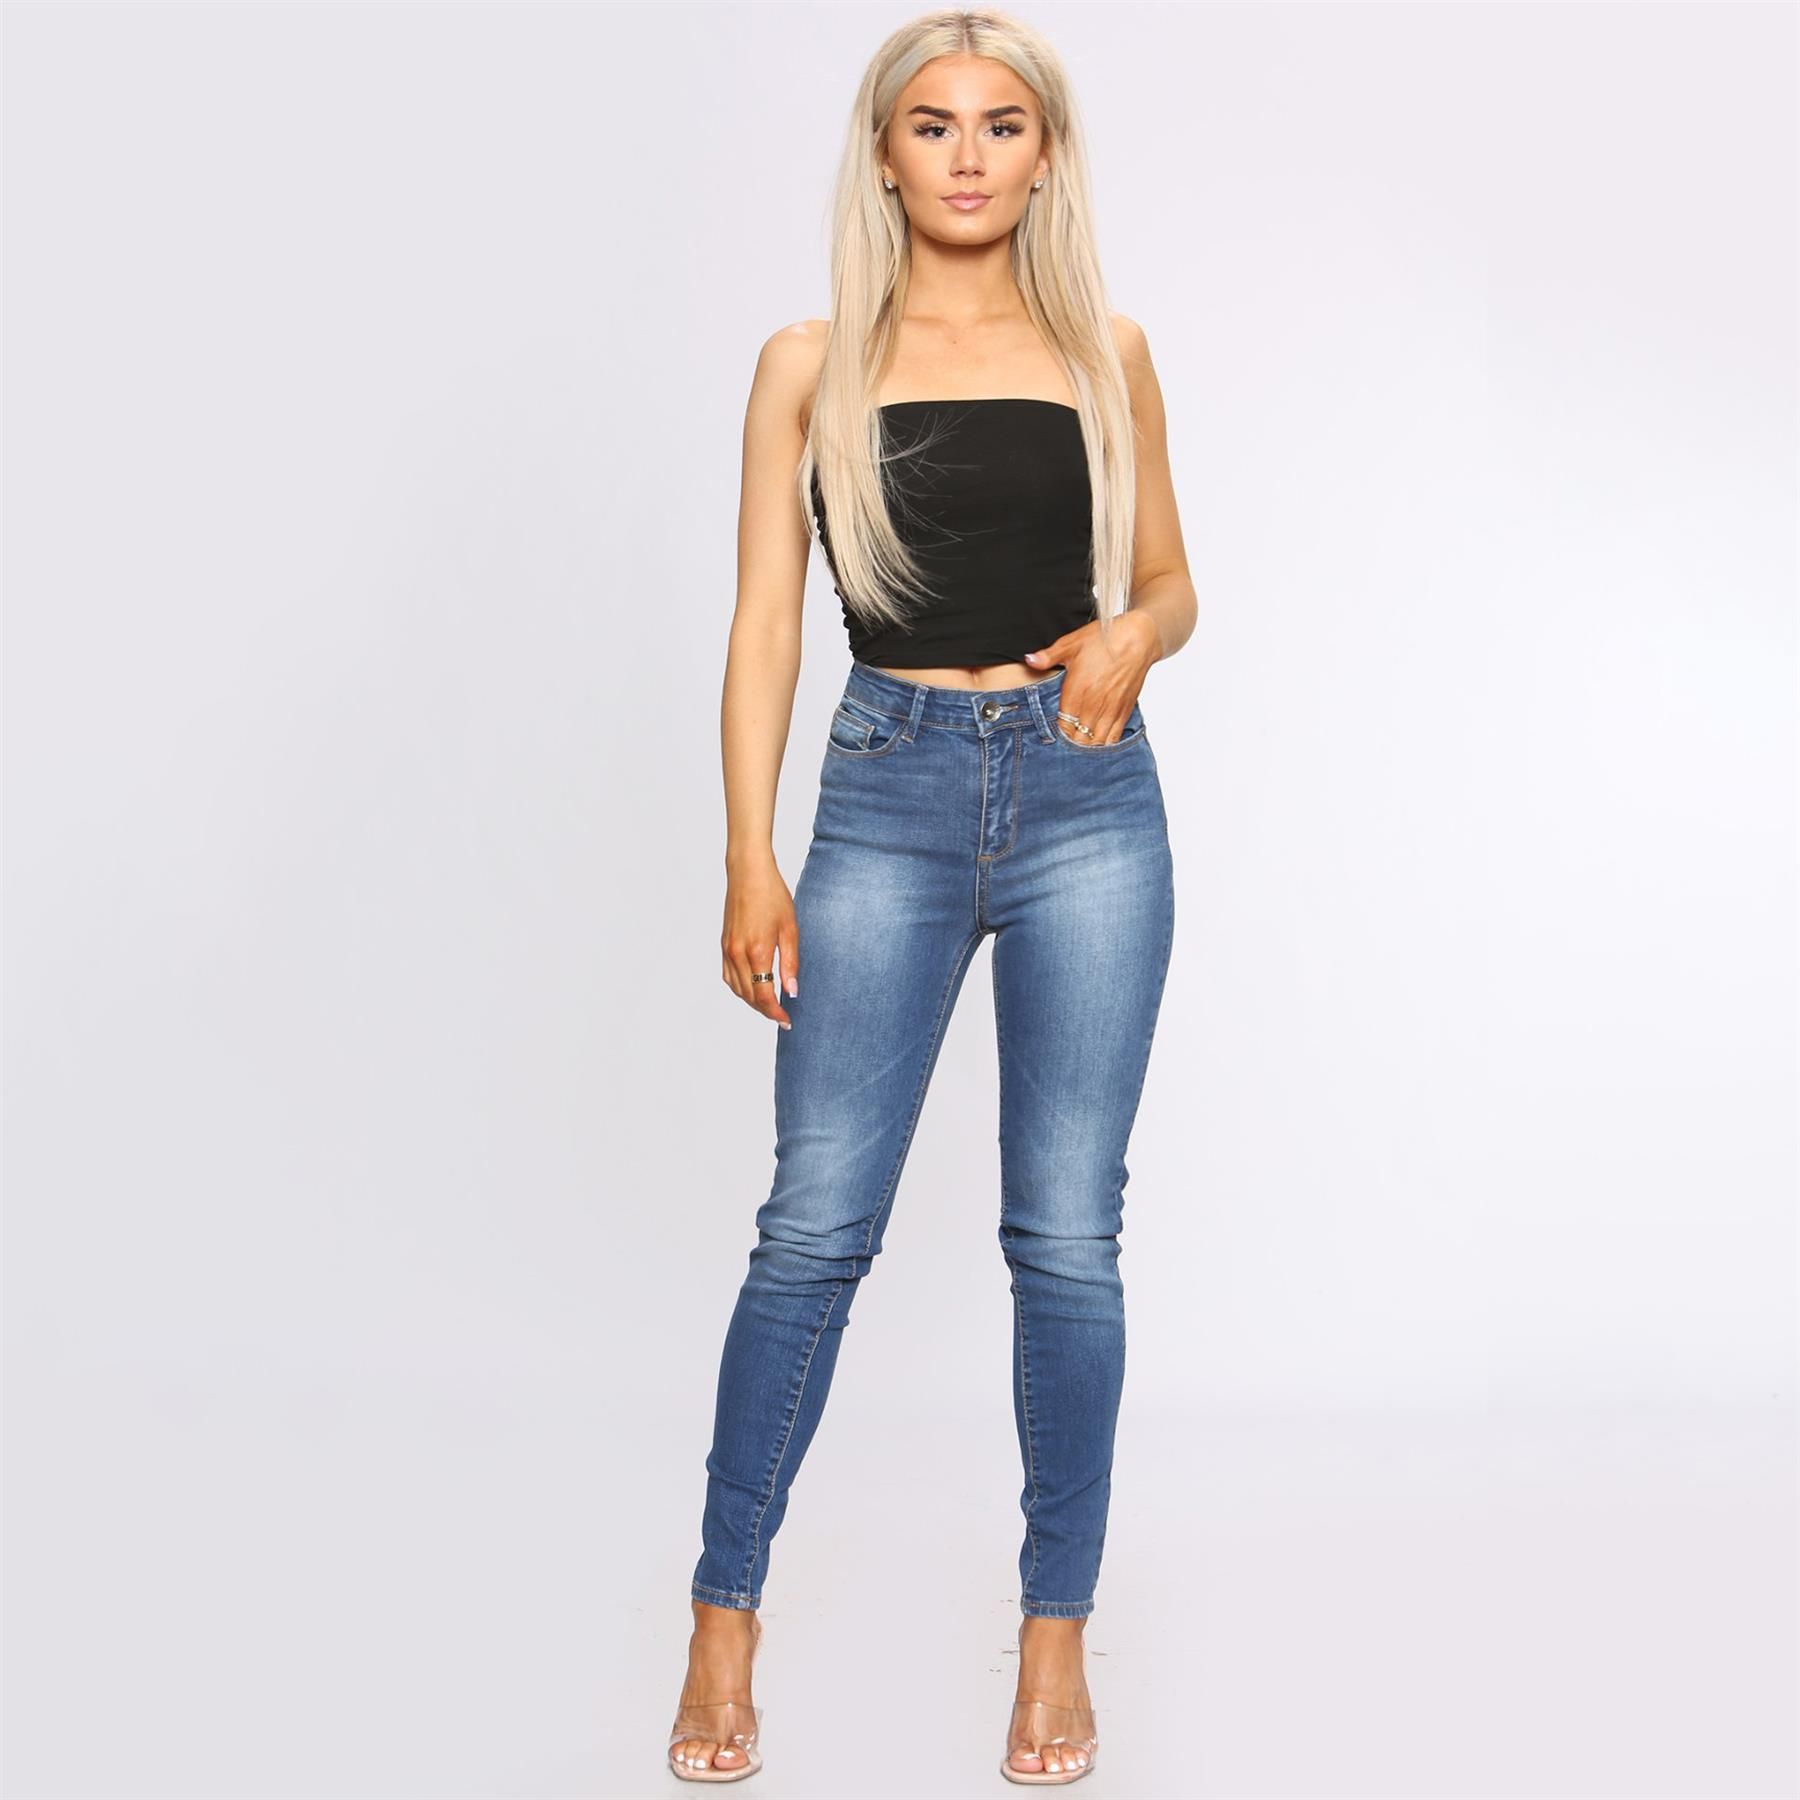 Enzo Womens Skinny Stretch Jeans, Slim Fitted Jeans With Faded Detail to Leg, Featuring 2 Front Pockets, 2 Back Pockets and 1 Coin Pocket, Zip Fly Fastening, 98% Cotton, 2% Elastane, Ideal for casual wear